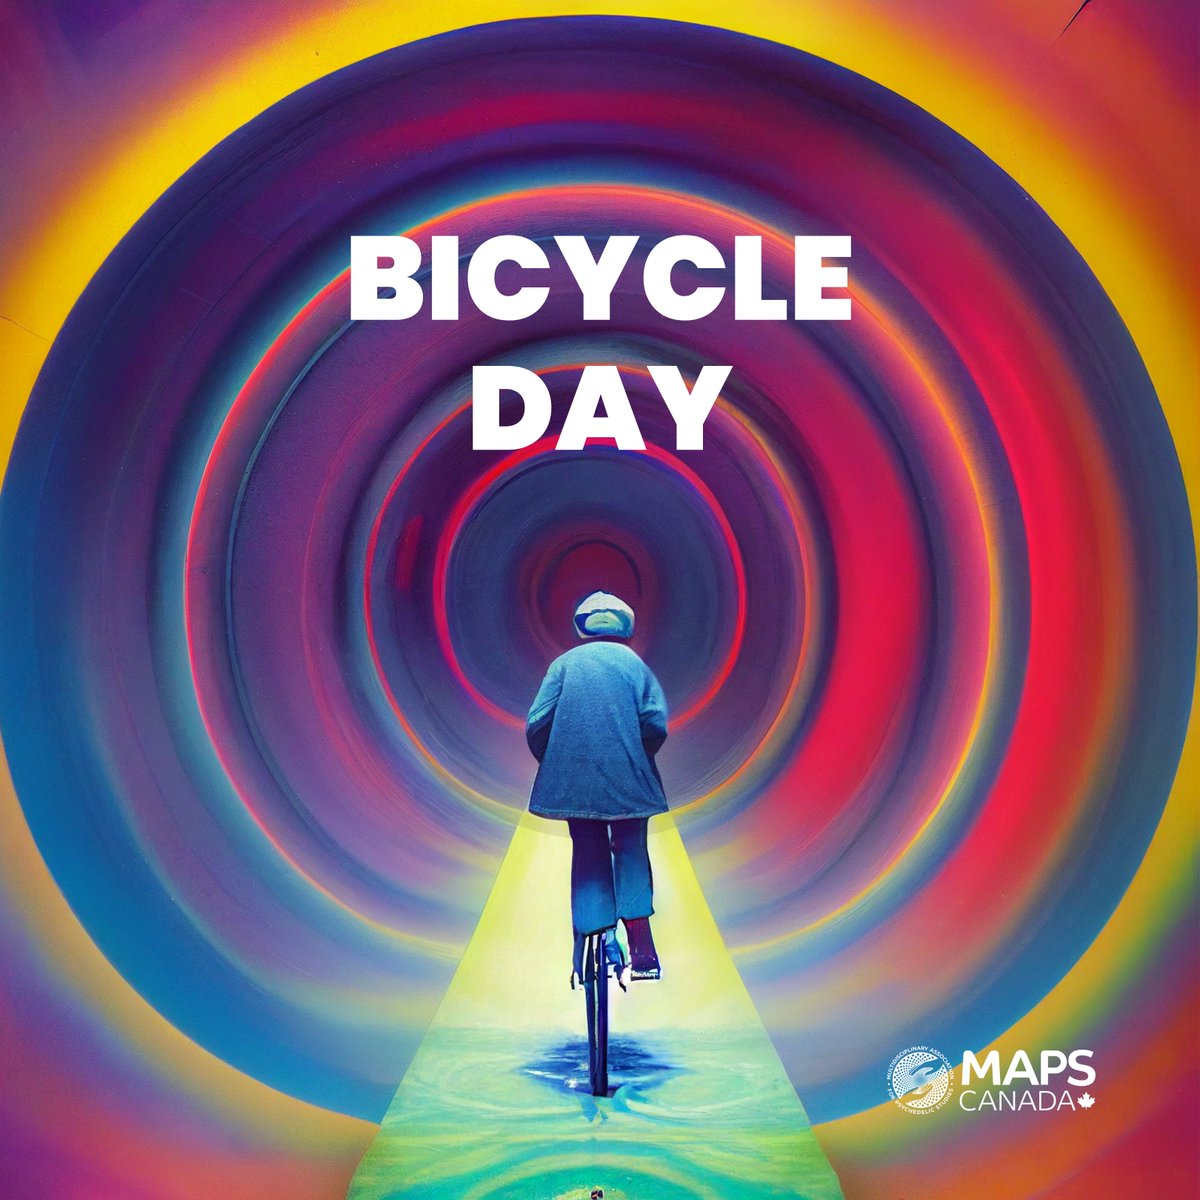 Today, we honour Bicycle Day, reflecting on the profound impact of psychedelic exploration. Let's continue fostering understanding and healing in our communities. 📷 #BicycleDay #PsychedelicResearch